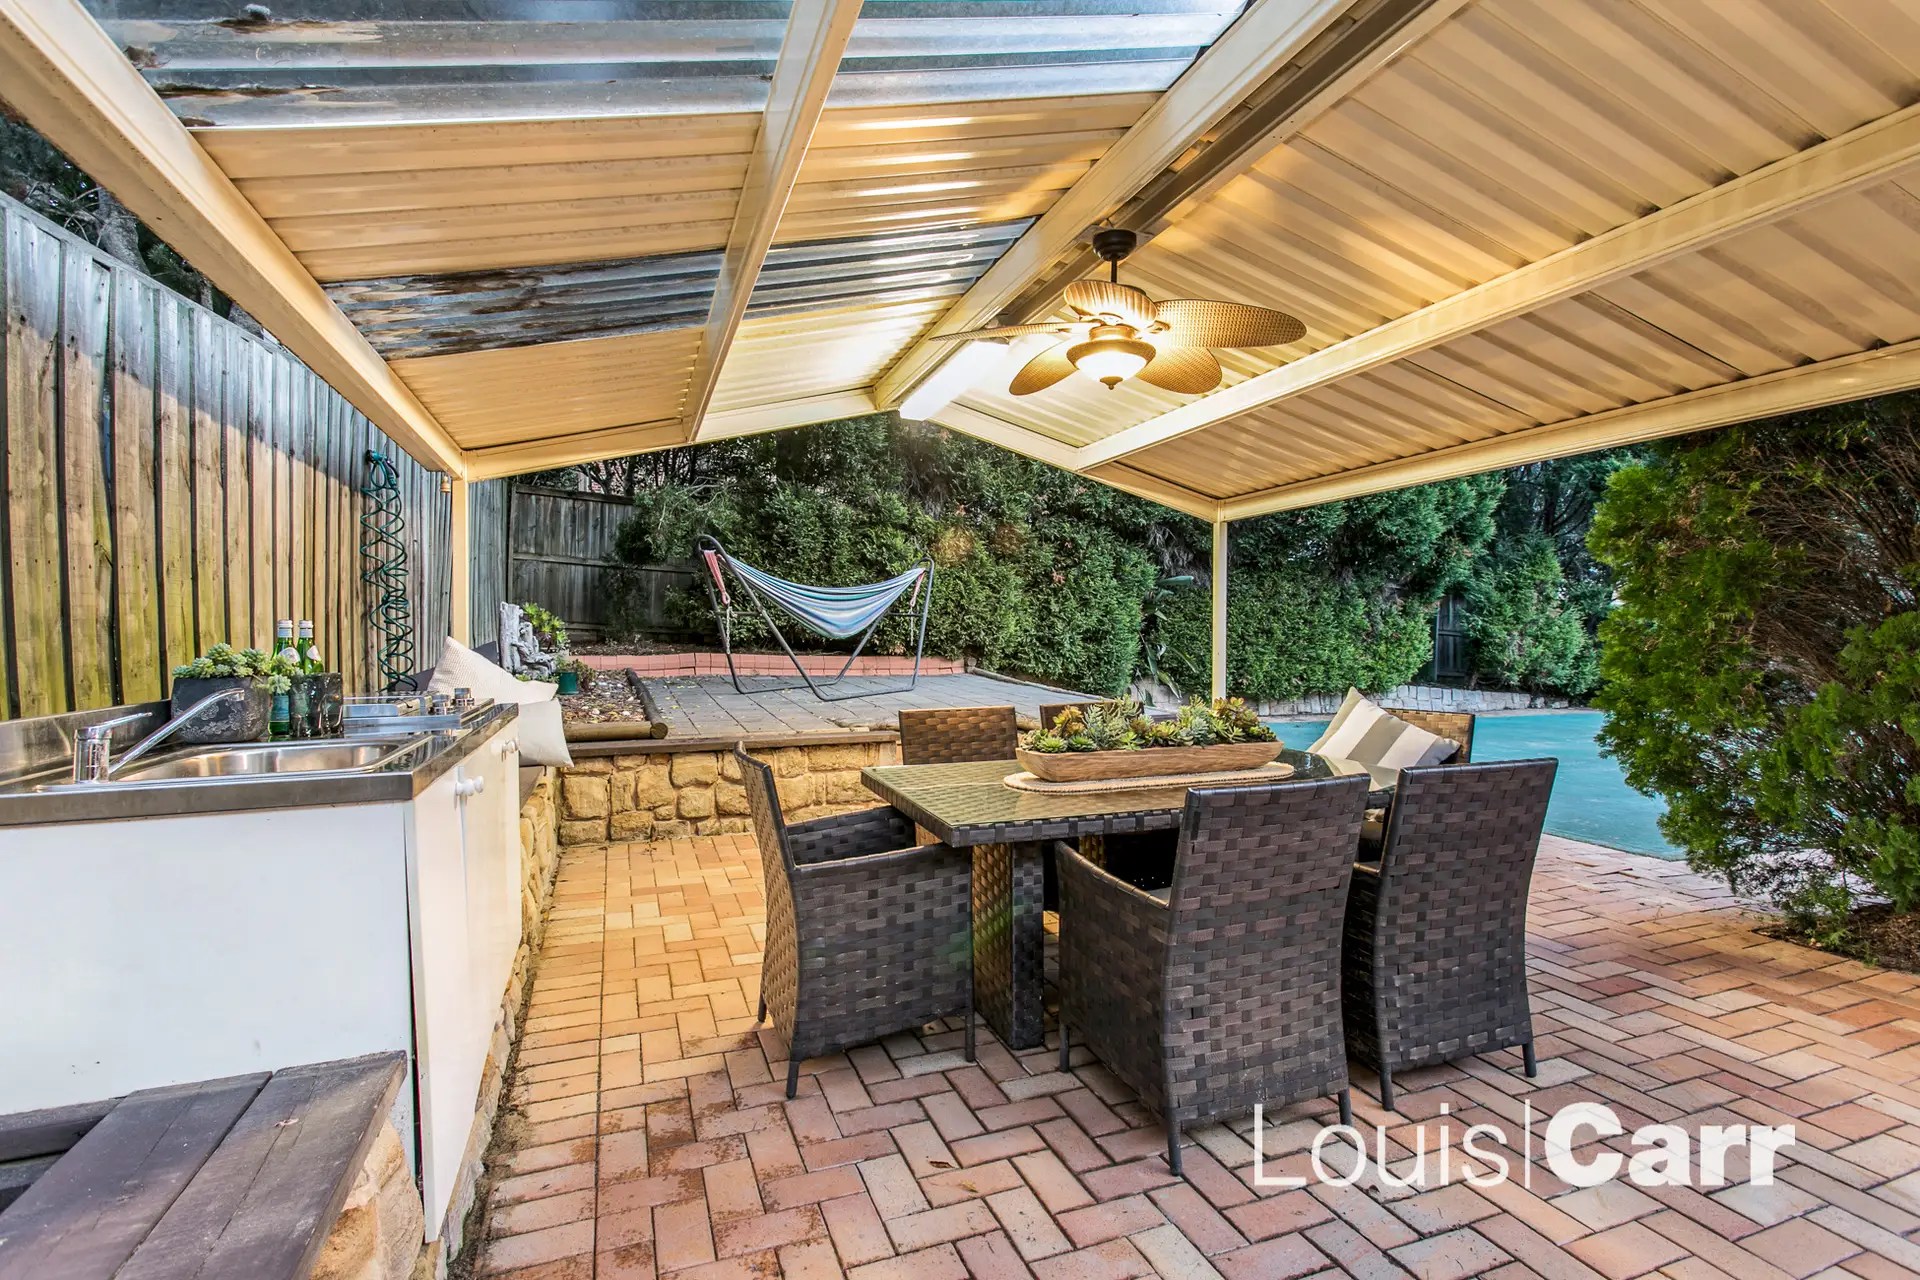 Photo #10: 5 Avonleigh Way, West Pennant Hills - Sold by Louis Carr Real Estate